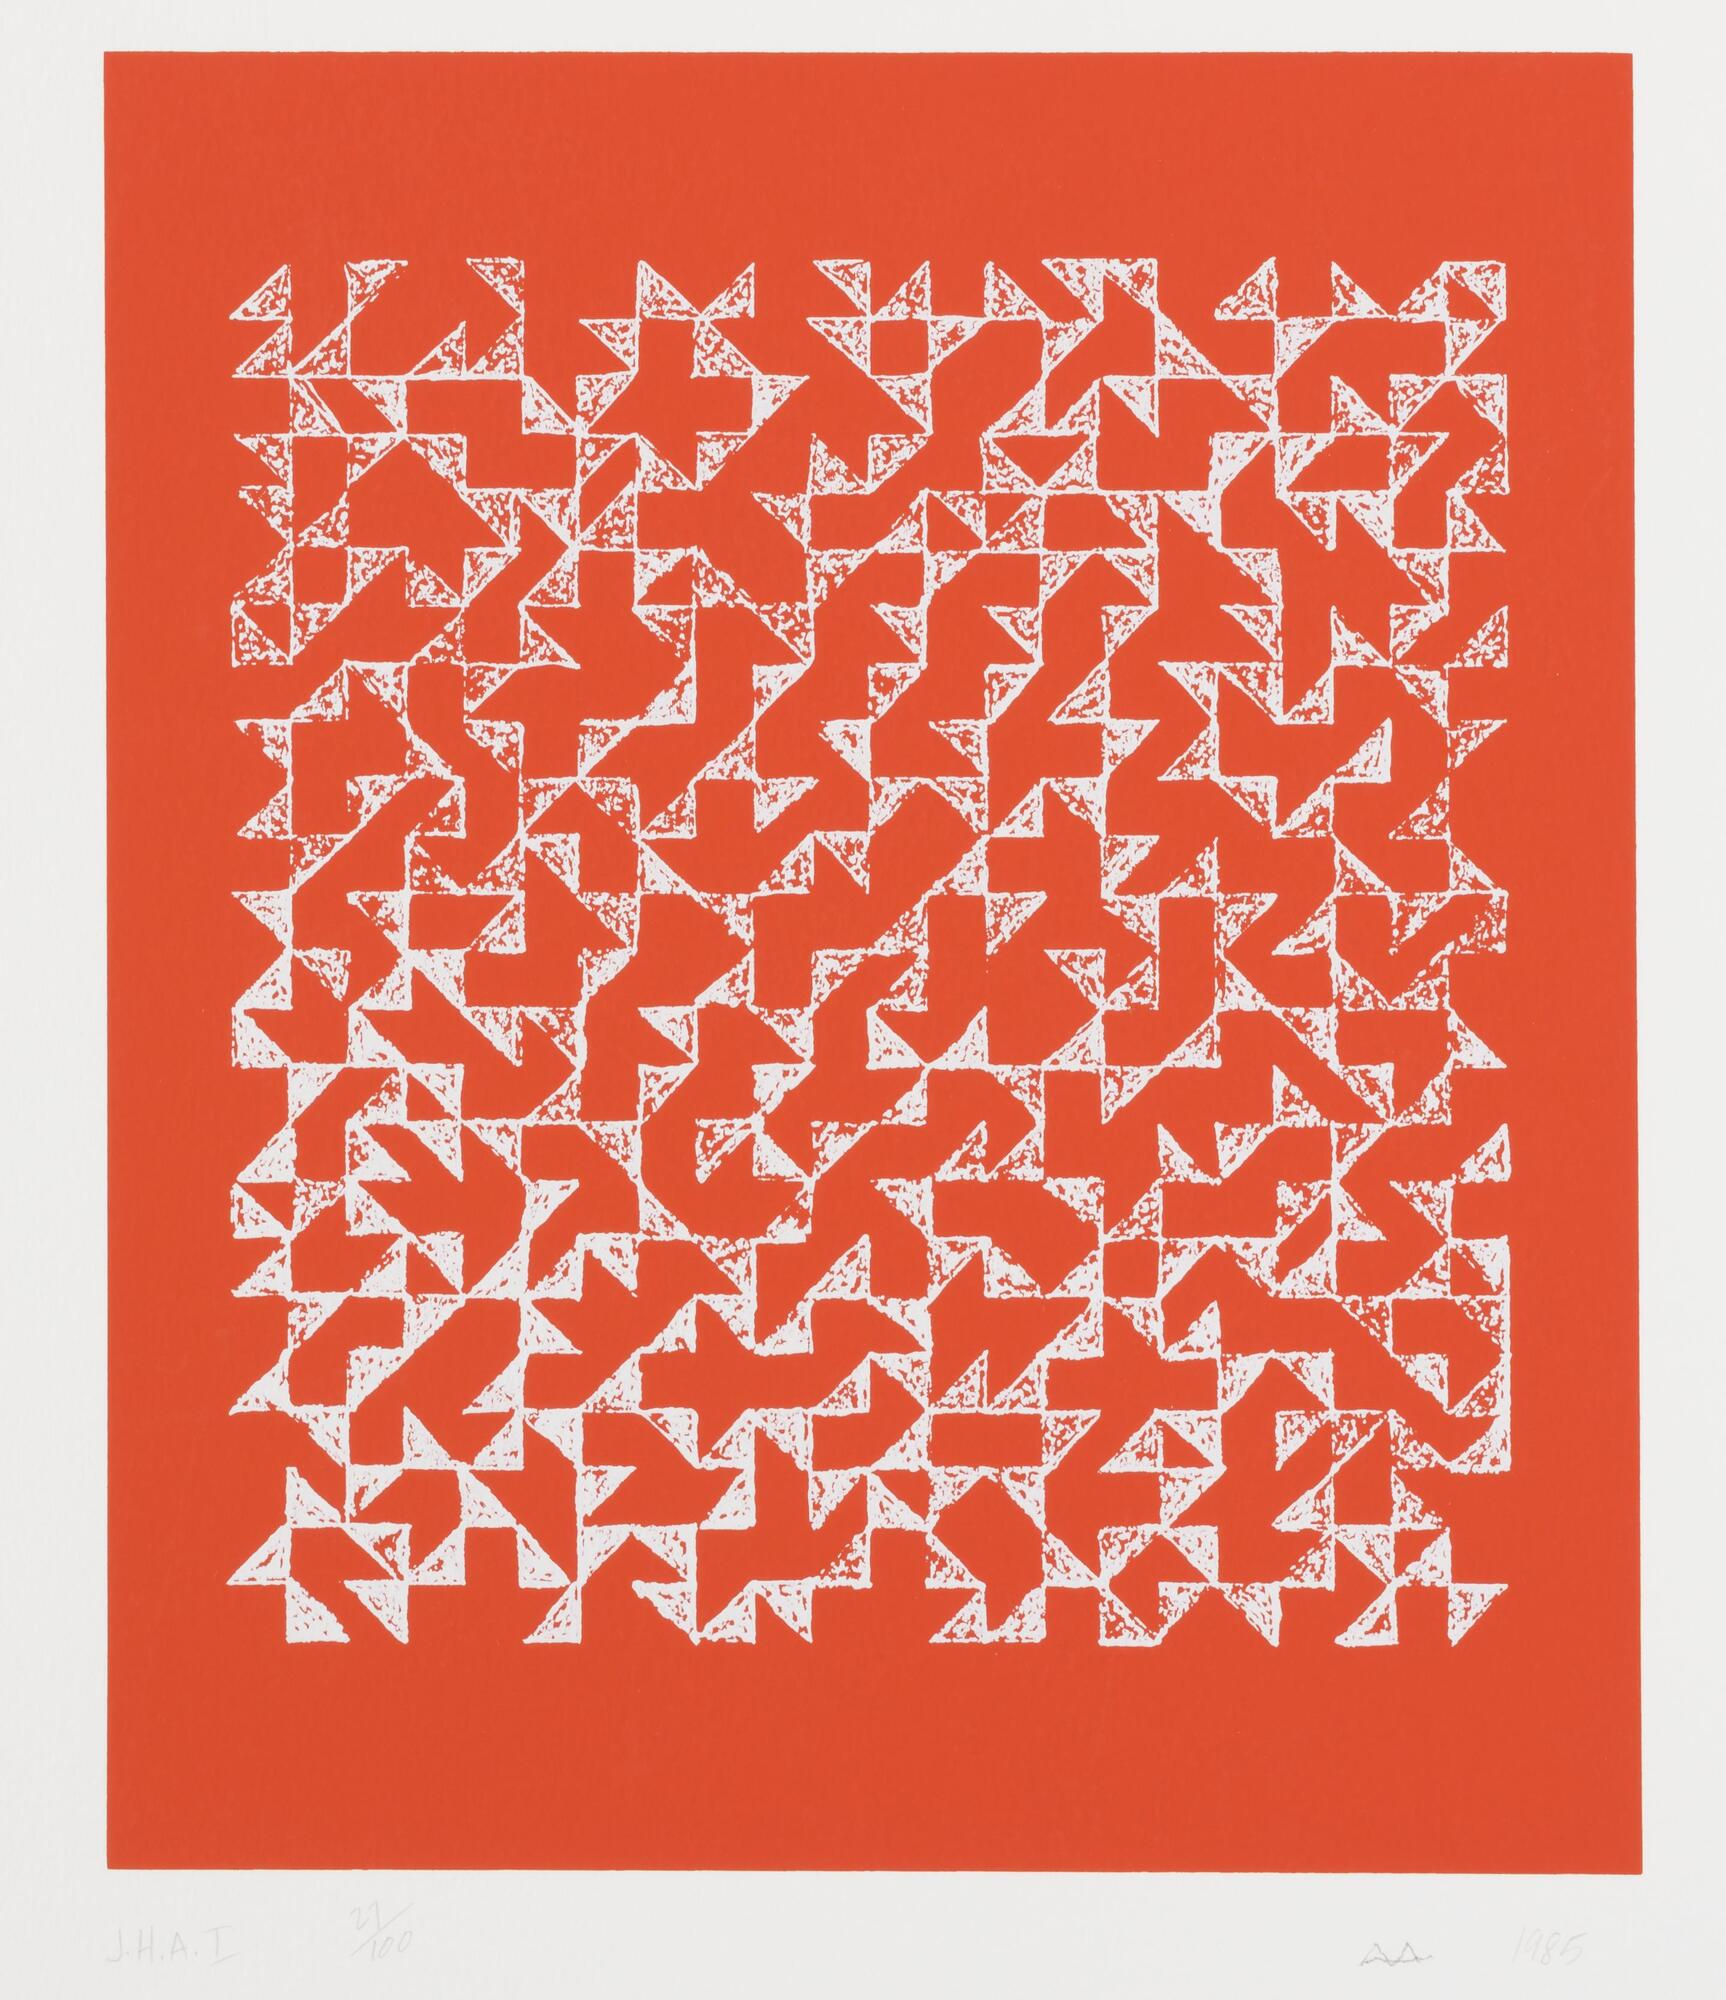 This vertical abstract composition resembles a quilt-like pattern of red on white on red background. 